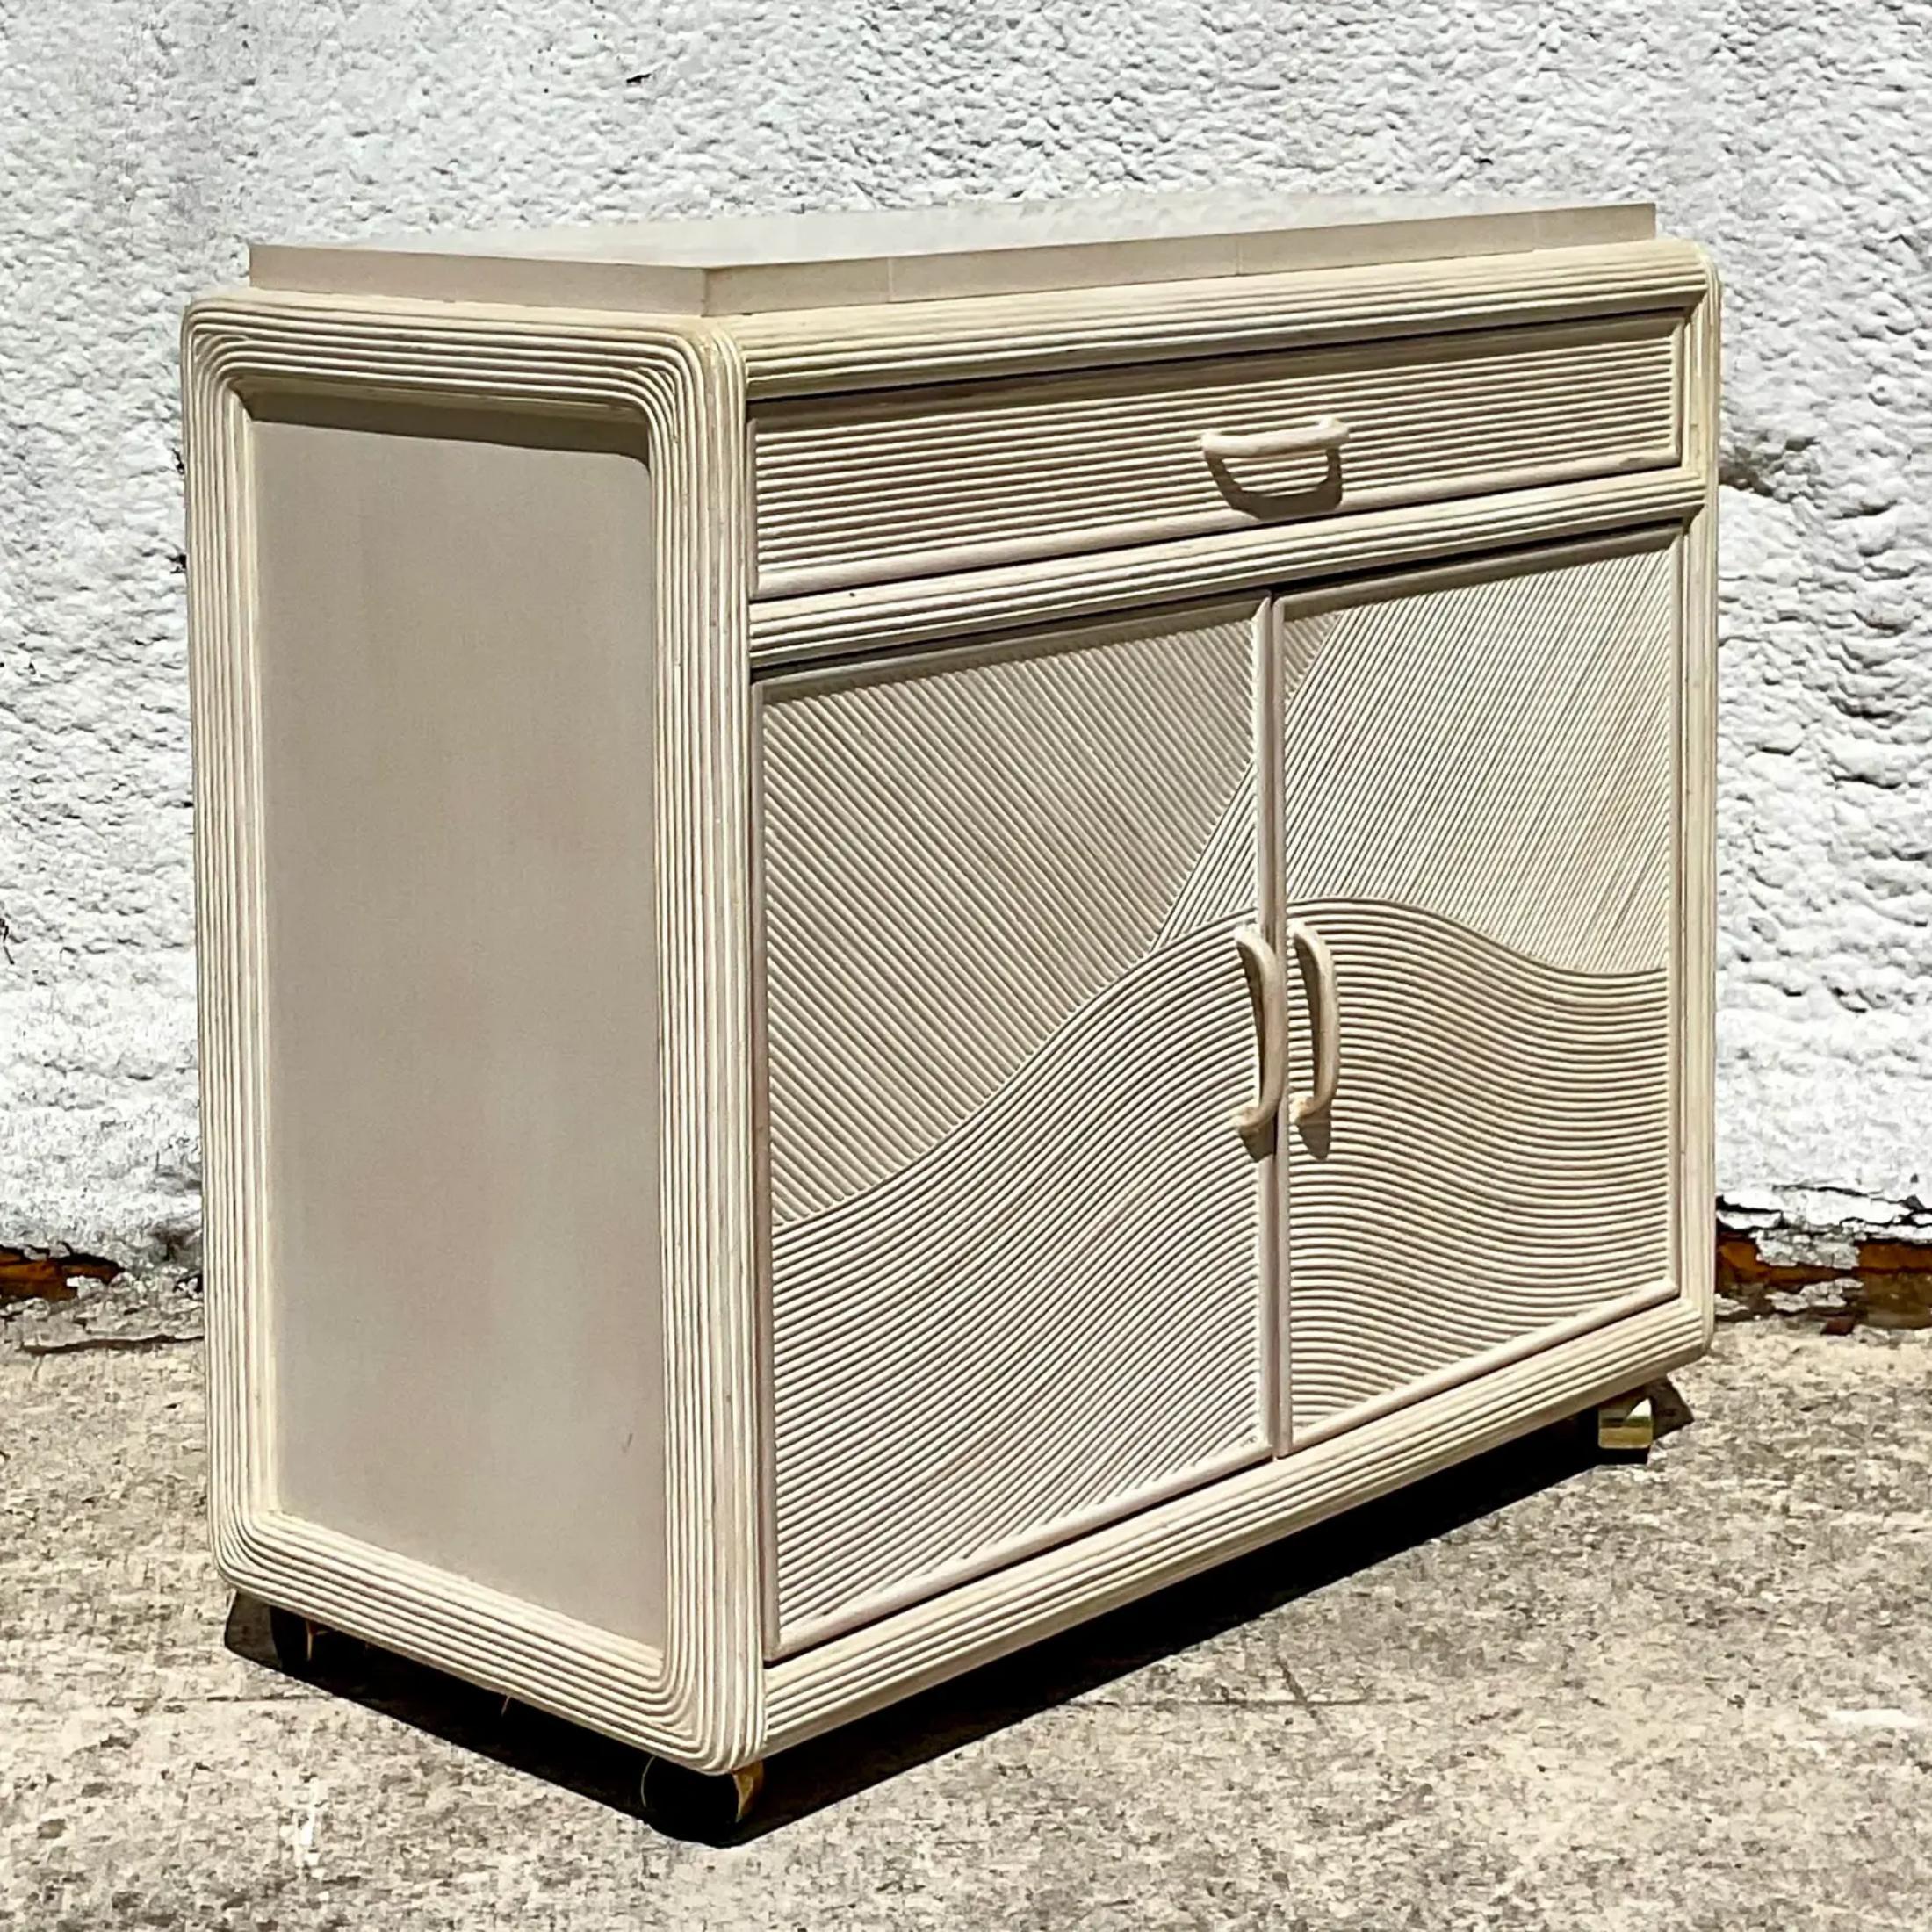 Fantastic vintage Coastal dry bar. Beautiful cerused pencil reed in a chic arched design. Lots of great storage below with a extending wings too for extra surface space. Moves around easily on casters. Perfect for indoors or outdoors in a covered